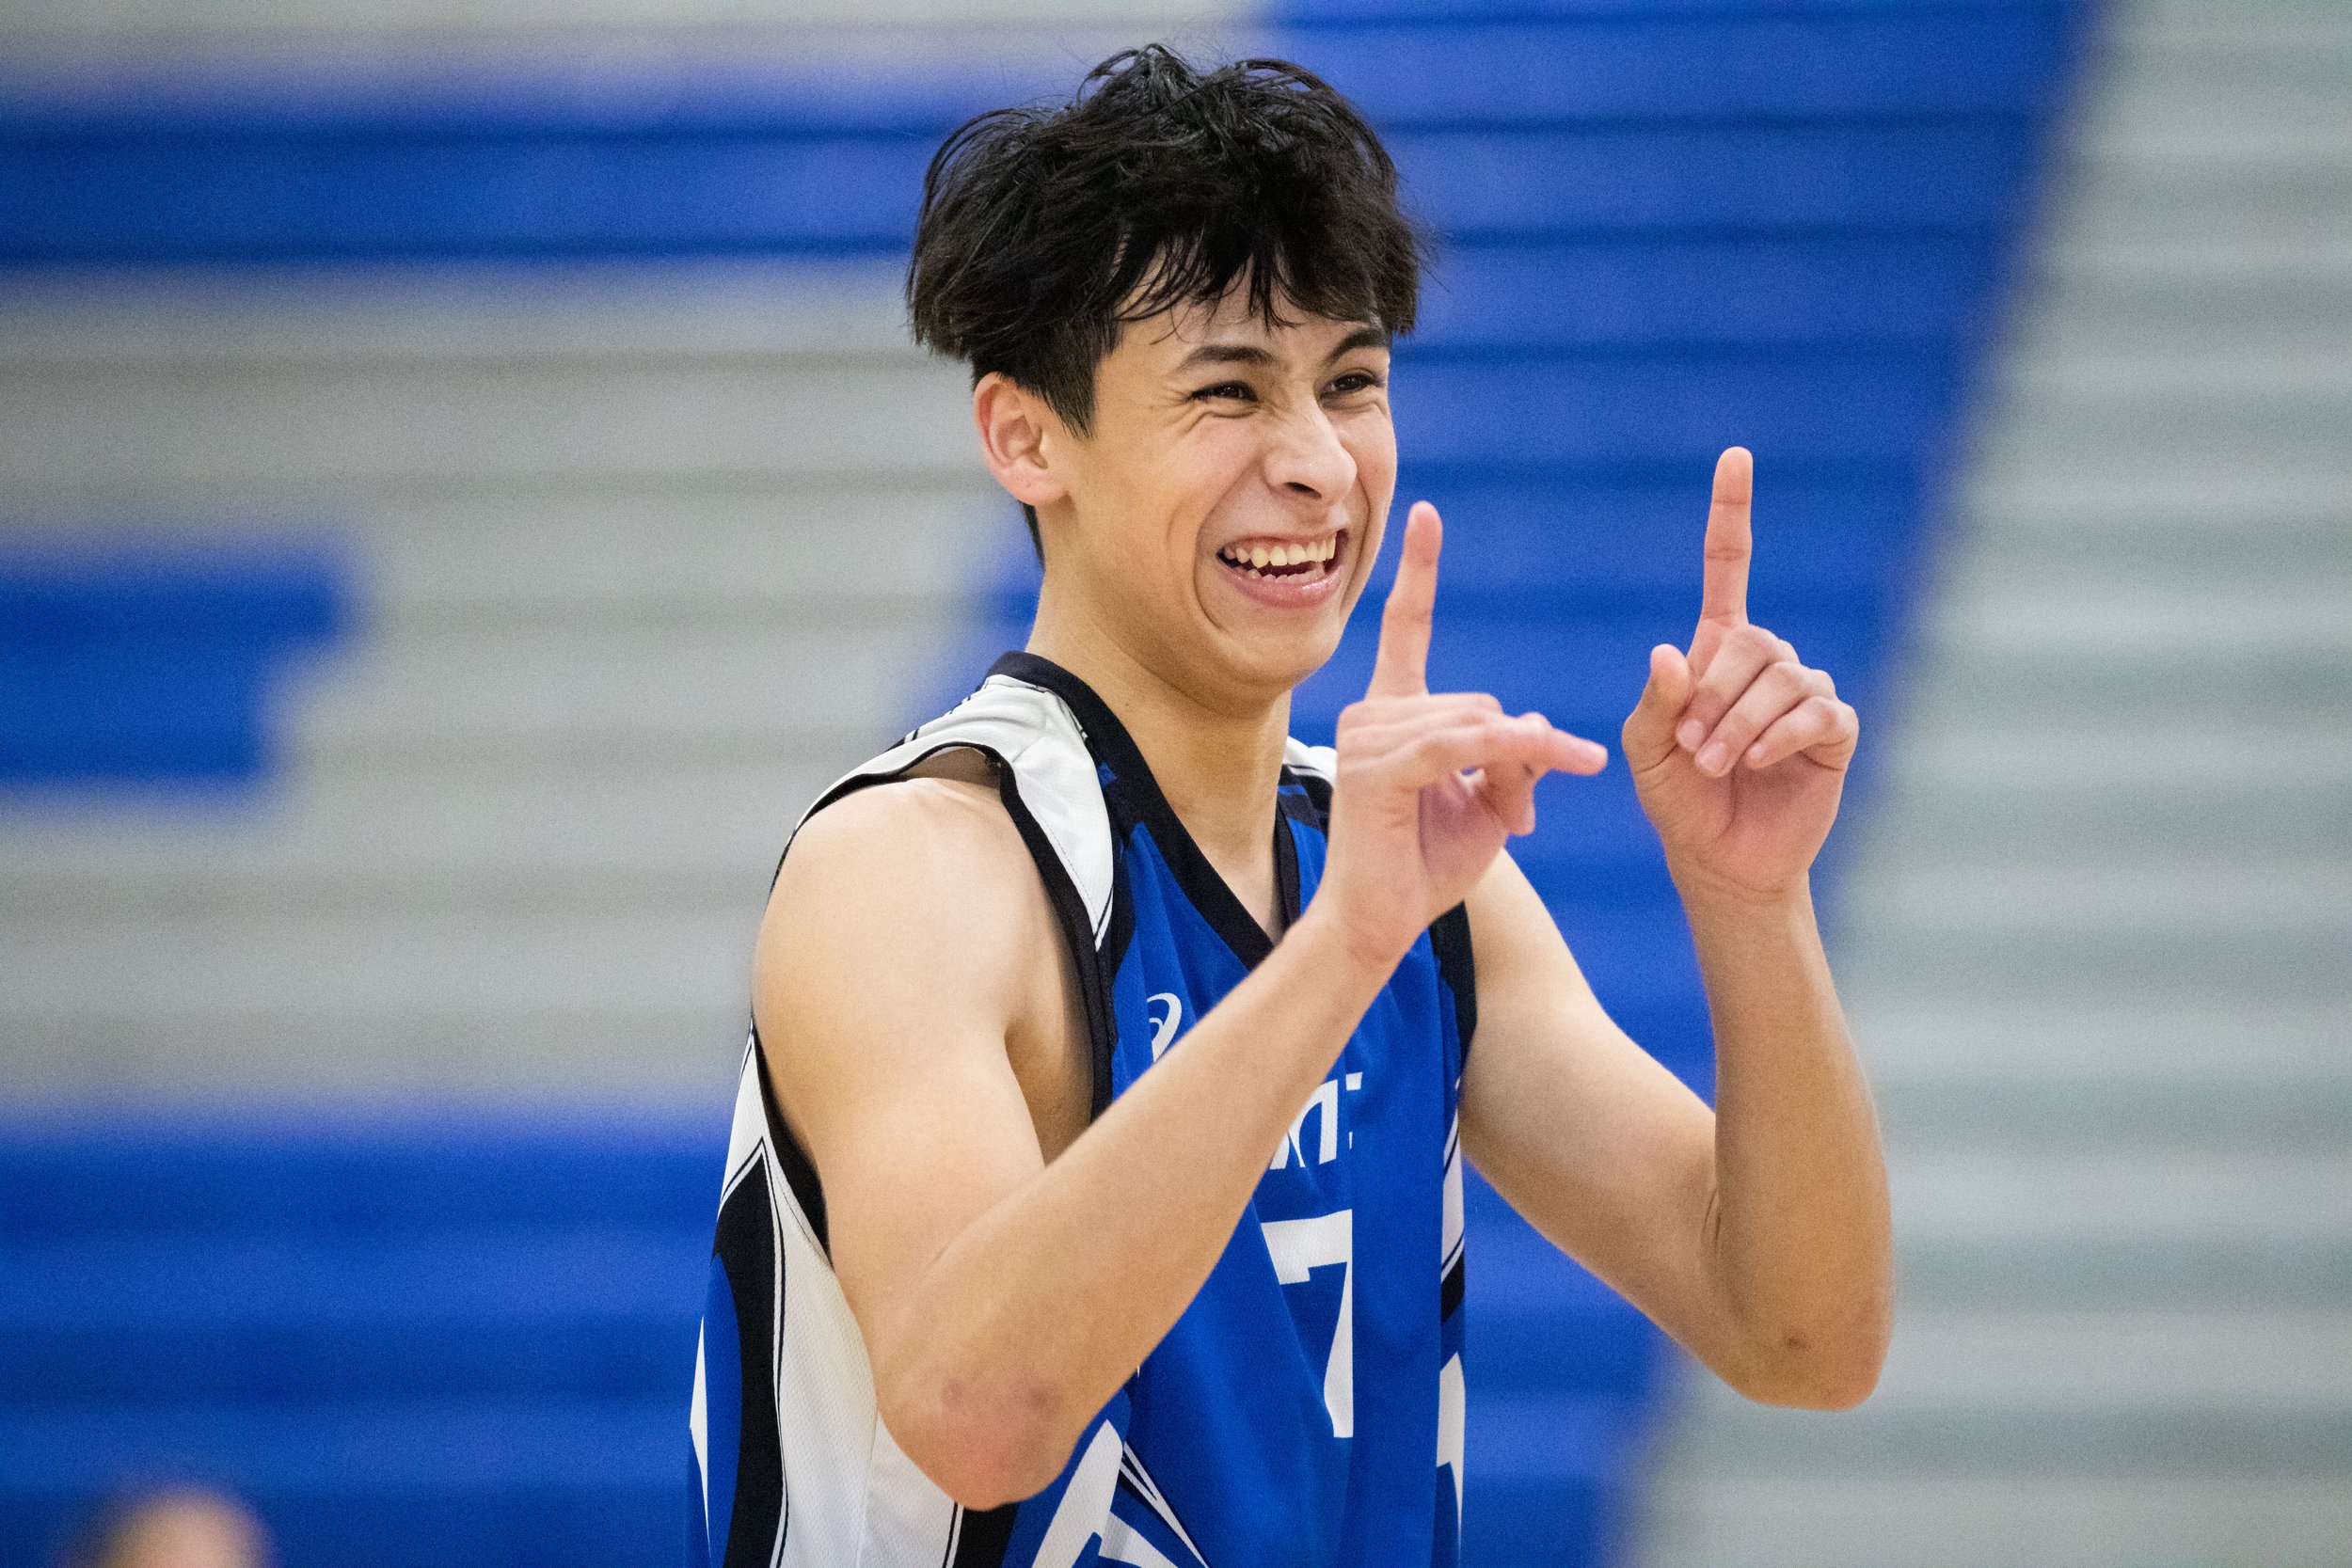  Santa Monica College Corsair libero Javier Castillo (7) reacting to scoring a point during the second set of a home game against Santa Barbara City College Vaqueros in Santa Monica, Calif., on Friday, March 24, 2023. The game resulted in the Corsair